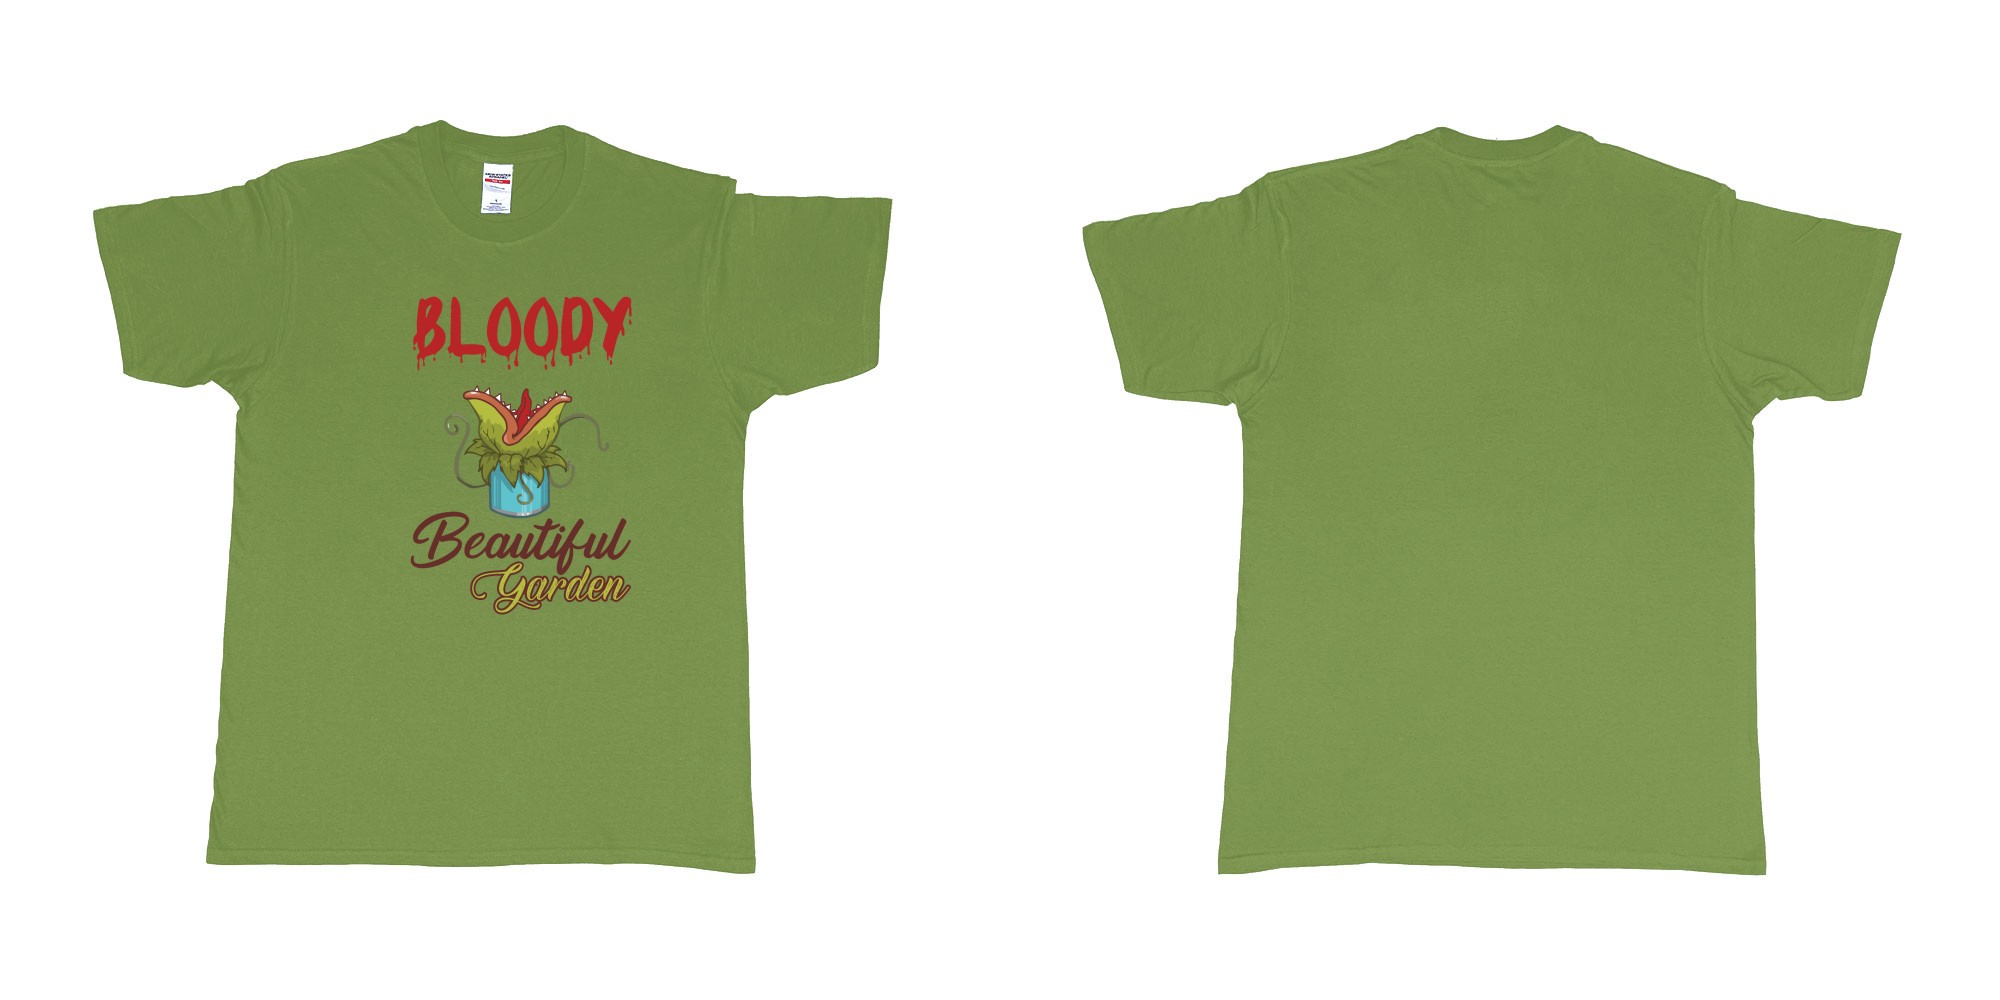 Custom tshirt design bloody beautiful garden little shop of horror in fabric color military-green choice your own text made in Bali by The Pirate Way